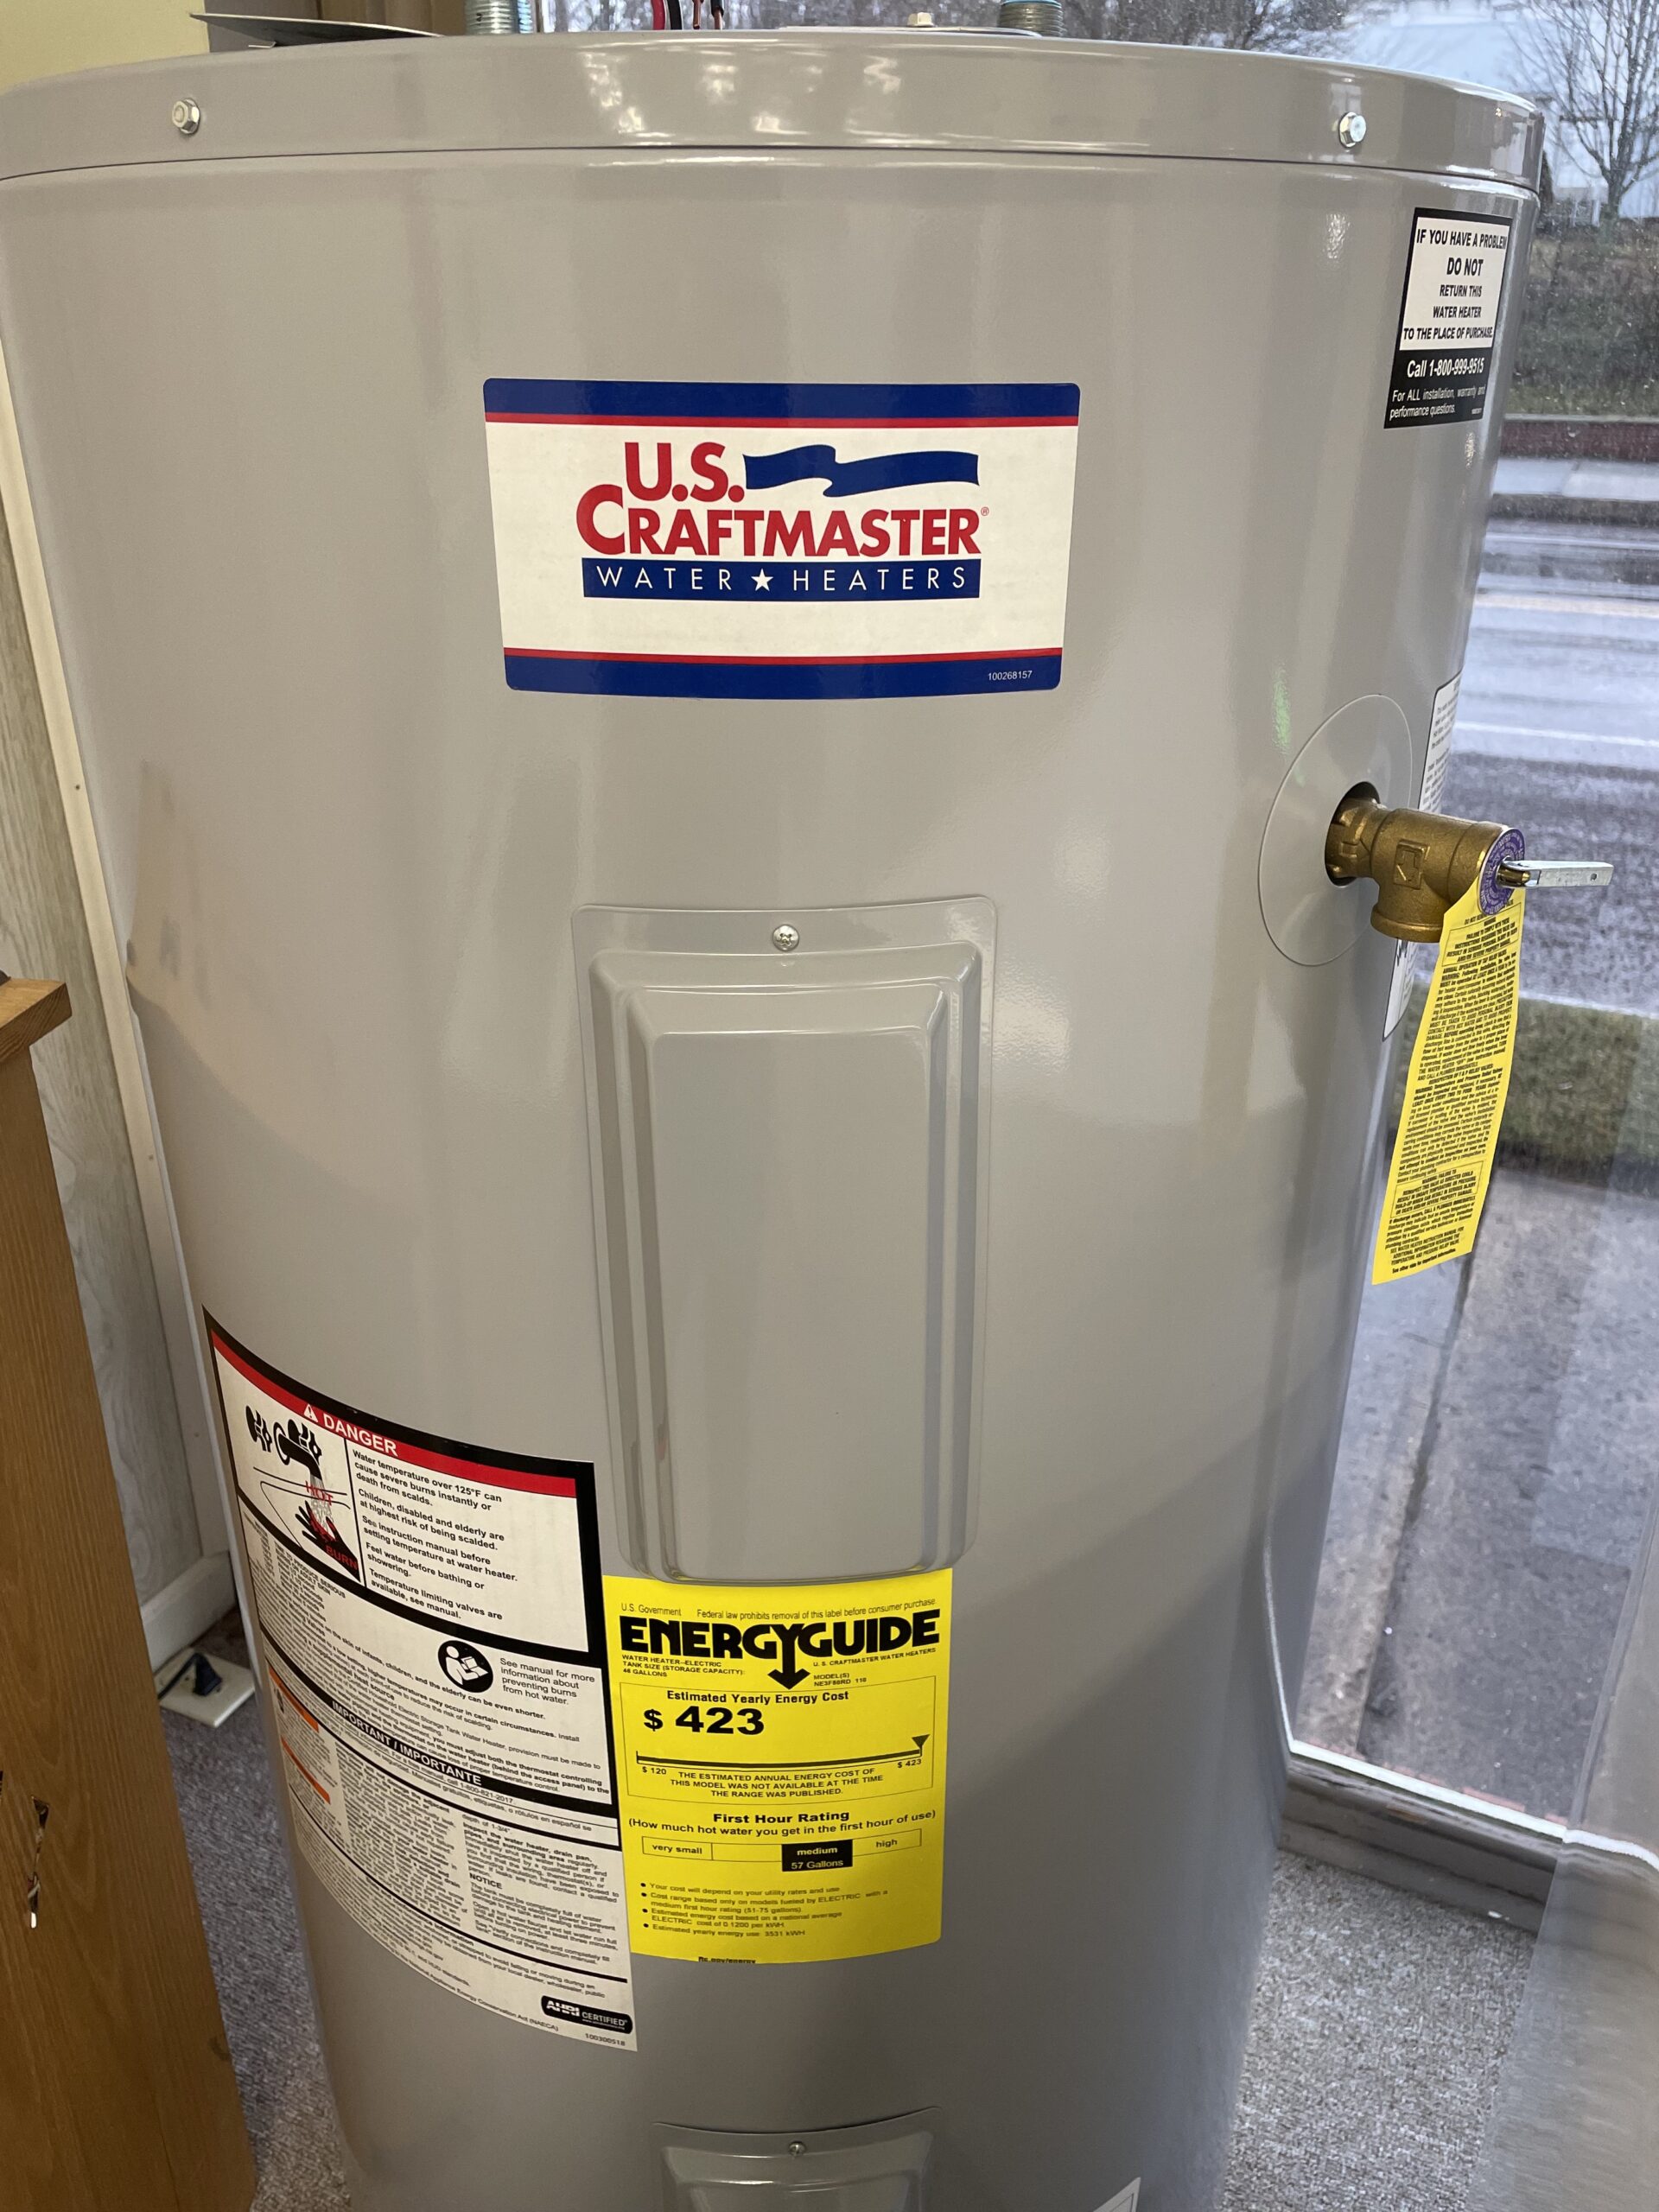 https://highpointappliance.com/wp-content/uploads/2023/02/US-craftmaster-electric-water-heater-highpoiint-appliances-meyersdale-pa-scaled.jpg